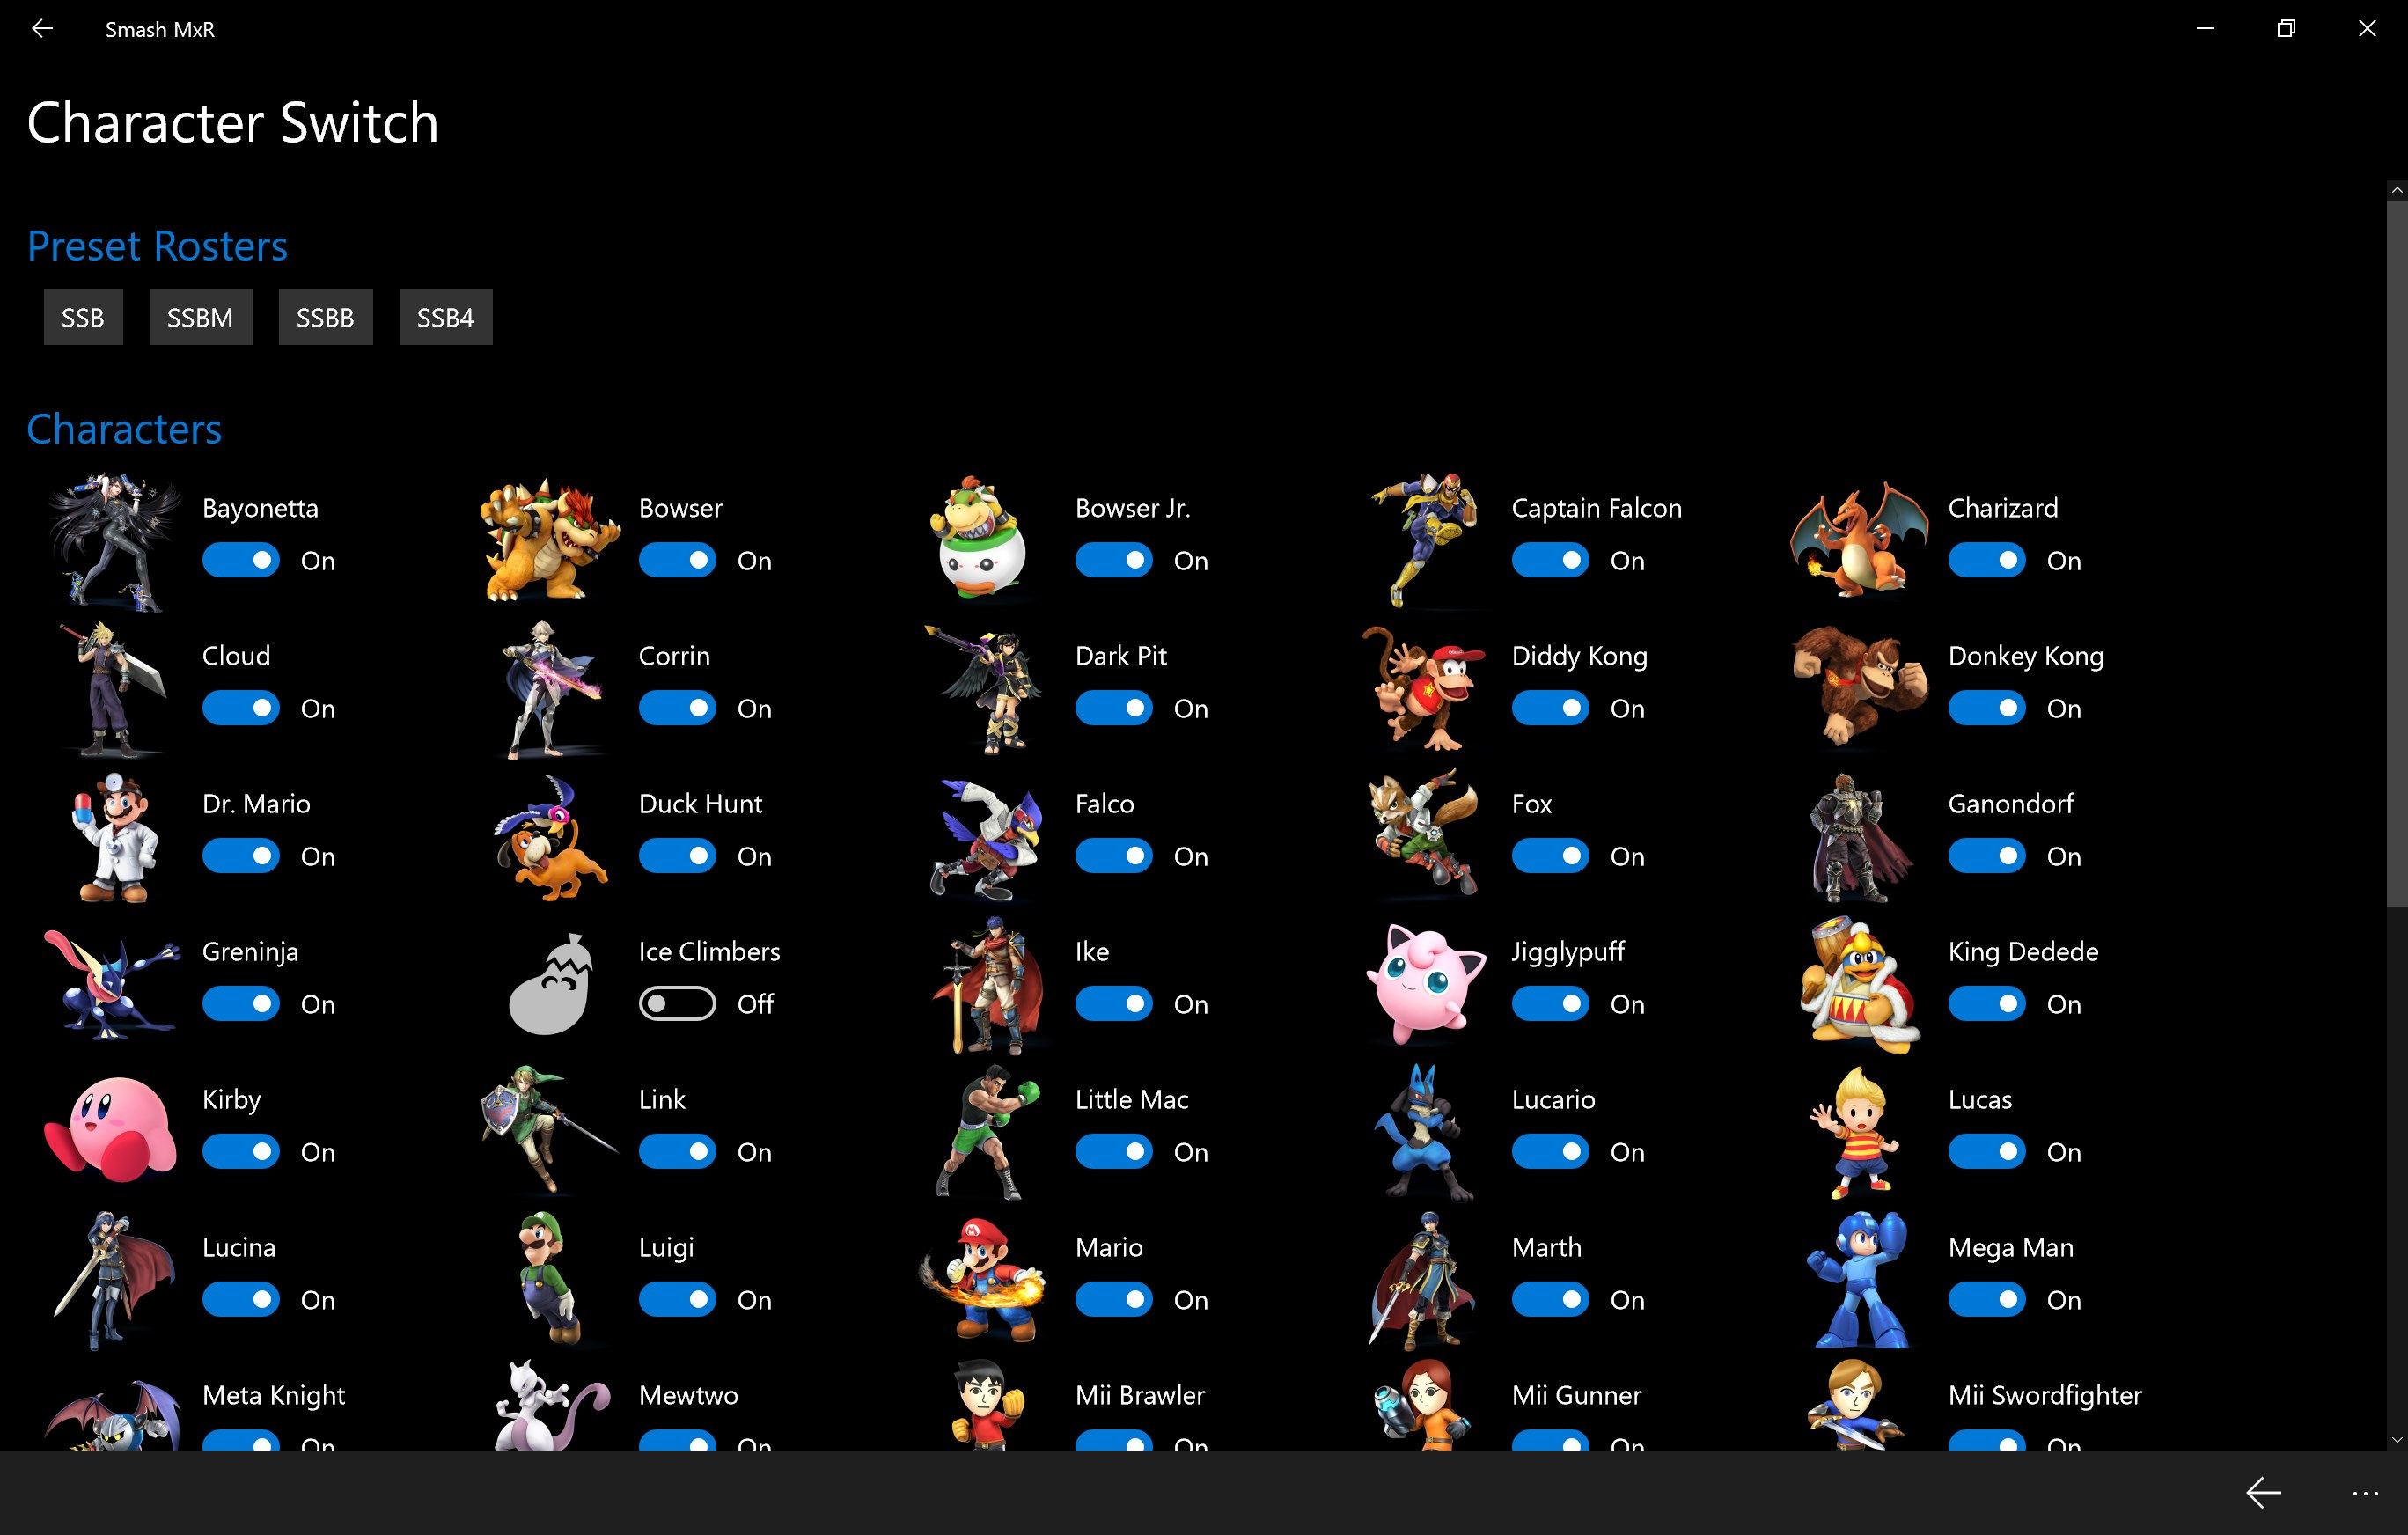 Customize the available characters from the full roster of characters from all 4 Super Smash Bros. games